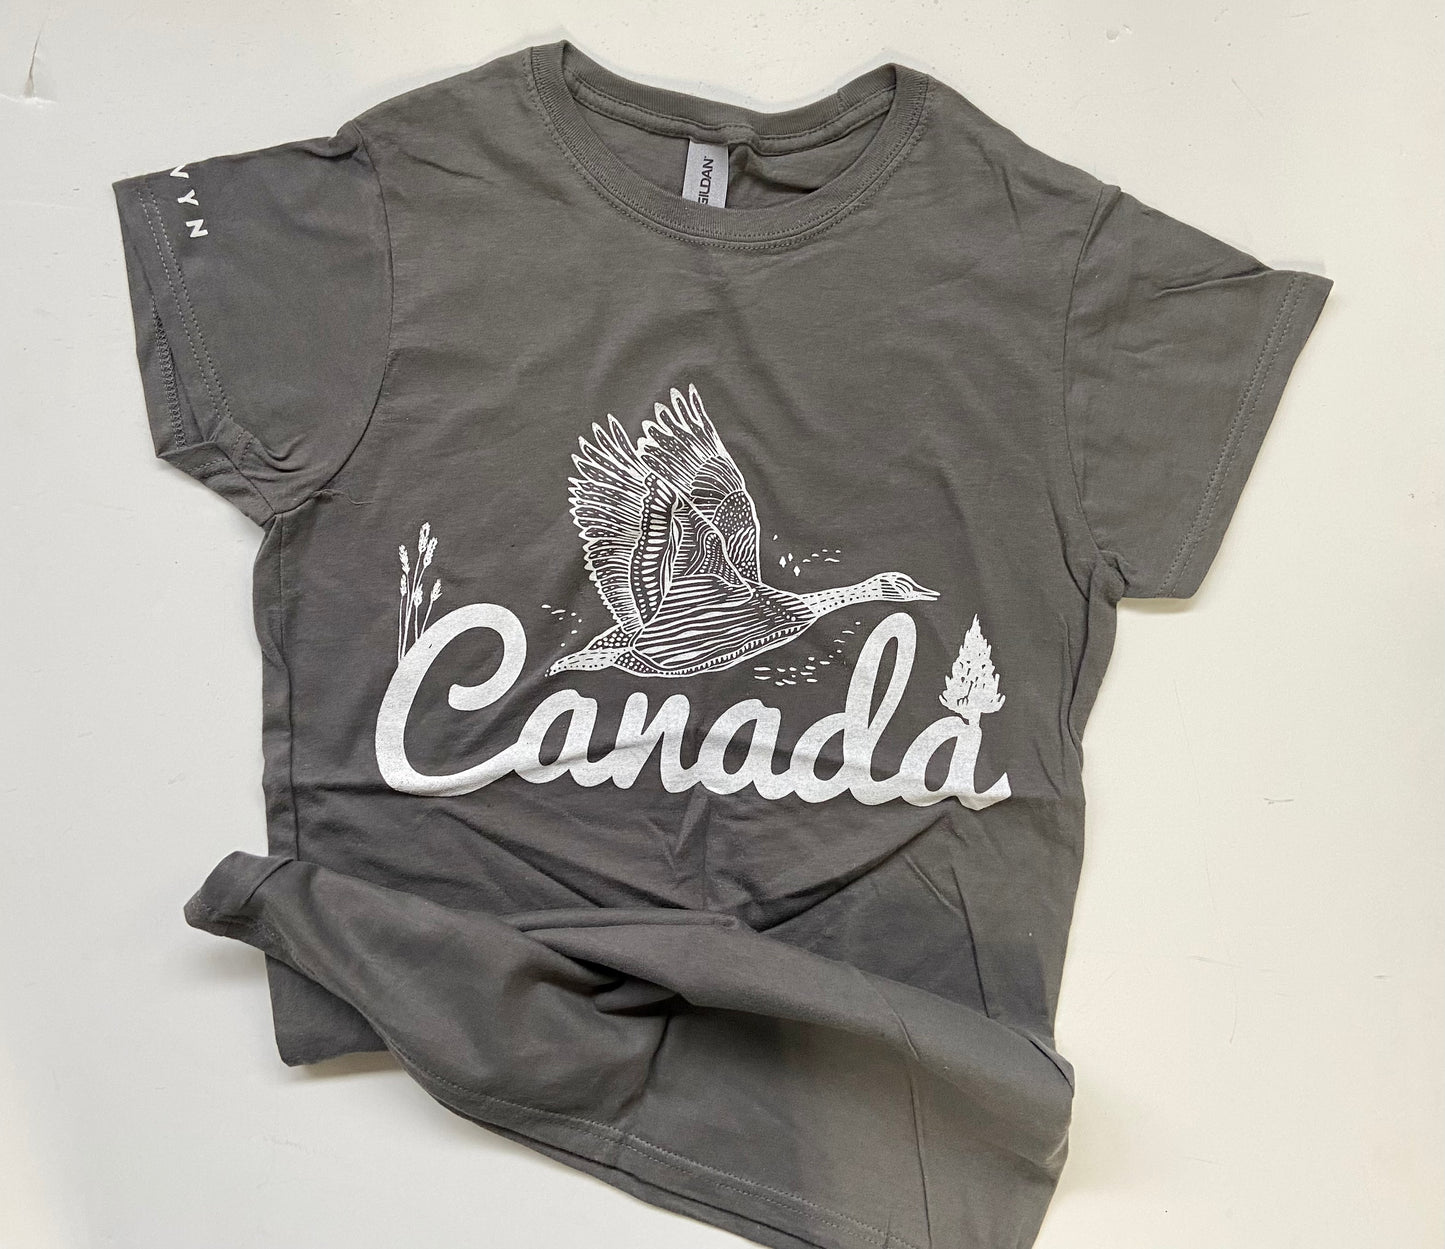 Canada Hand Printed Tee on Black or Grey - WOMENS FITTED